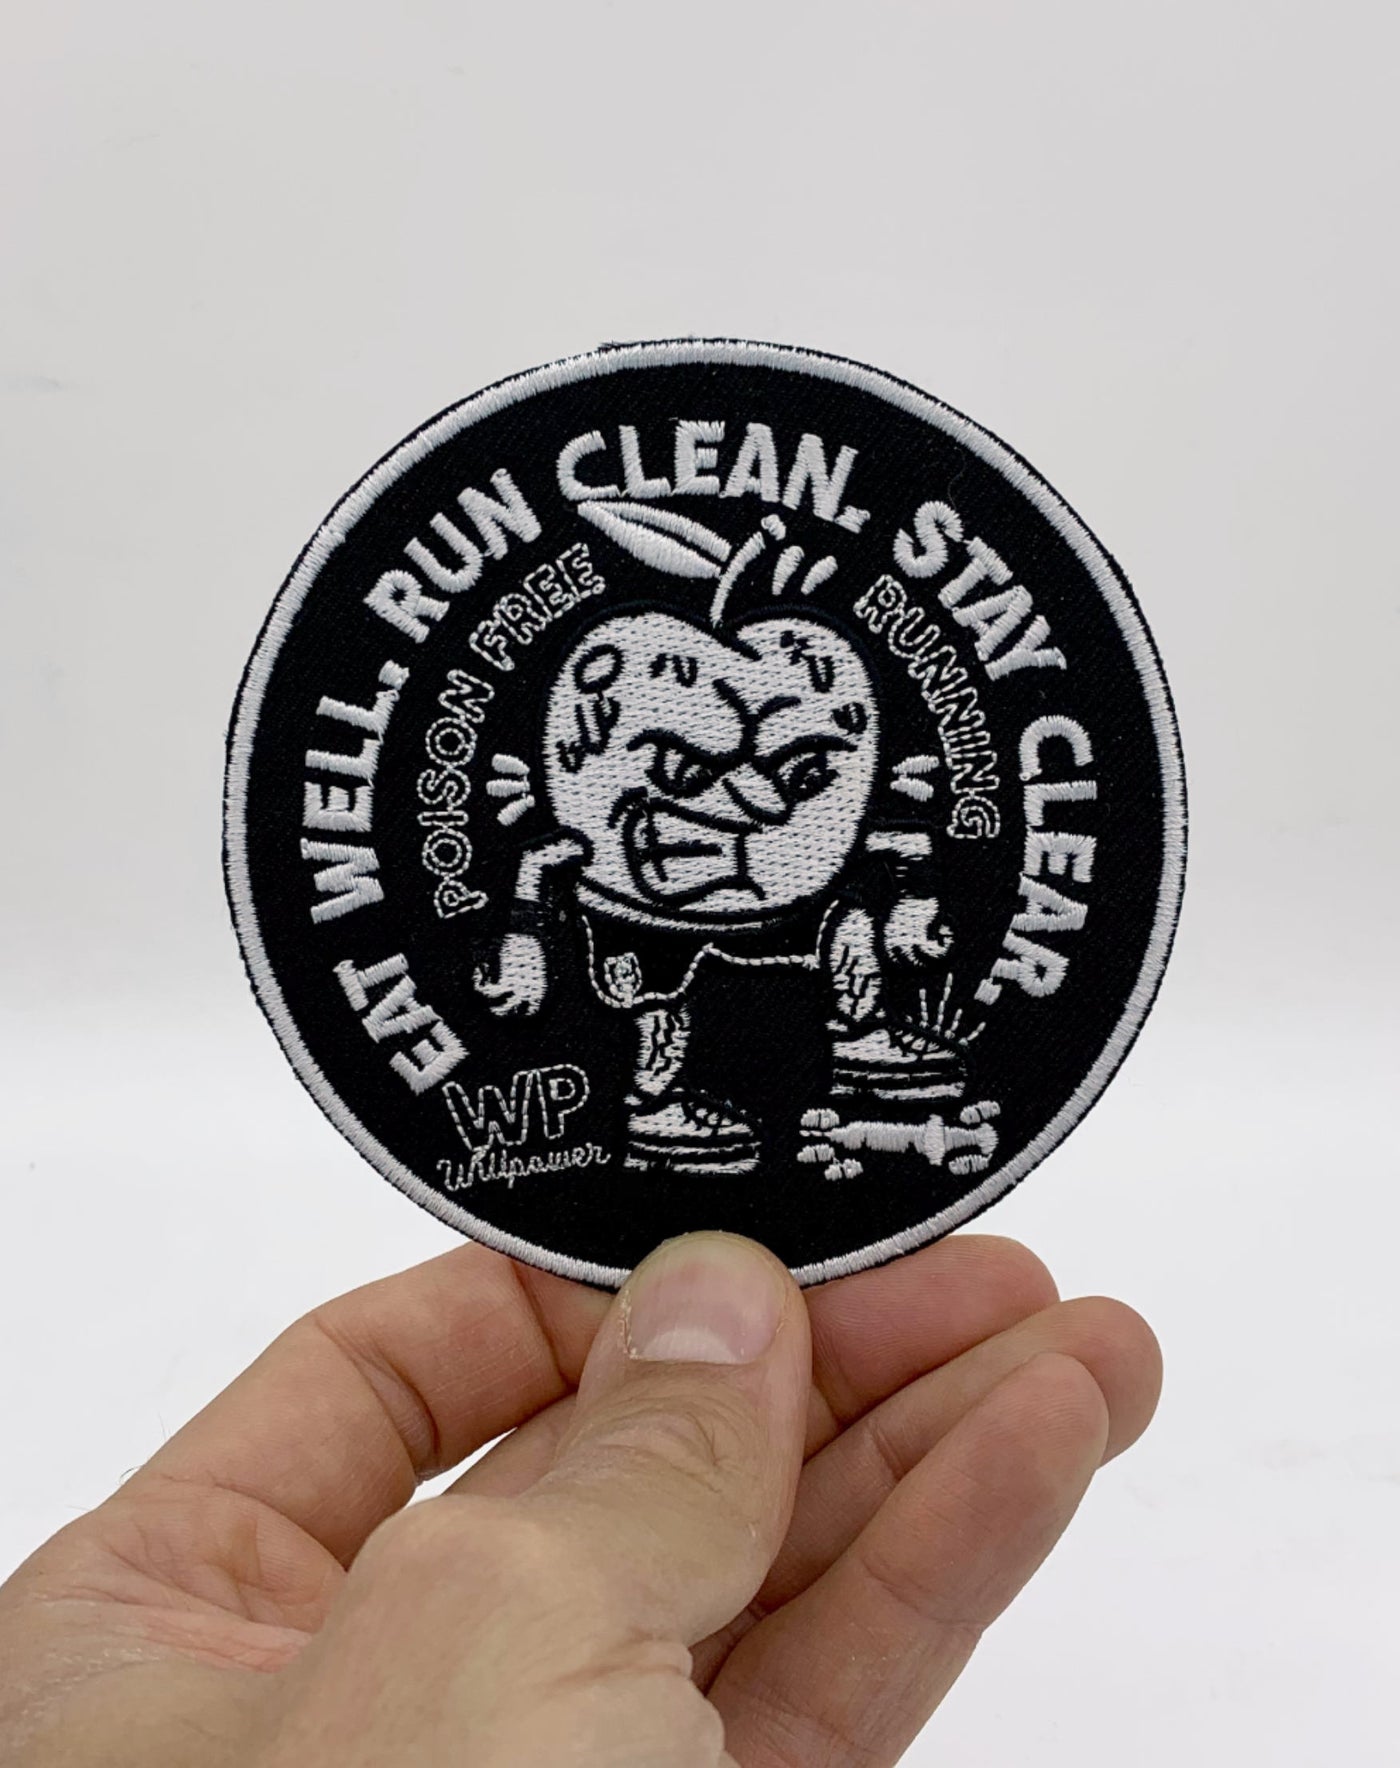 "Eat Well - Run Clean- Stay Clear" Patch